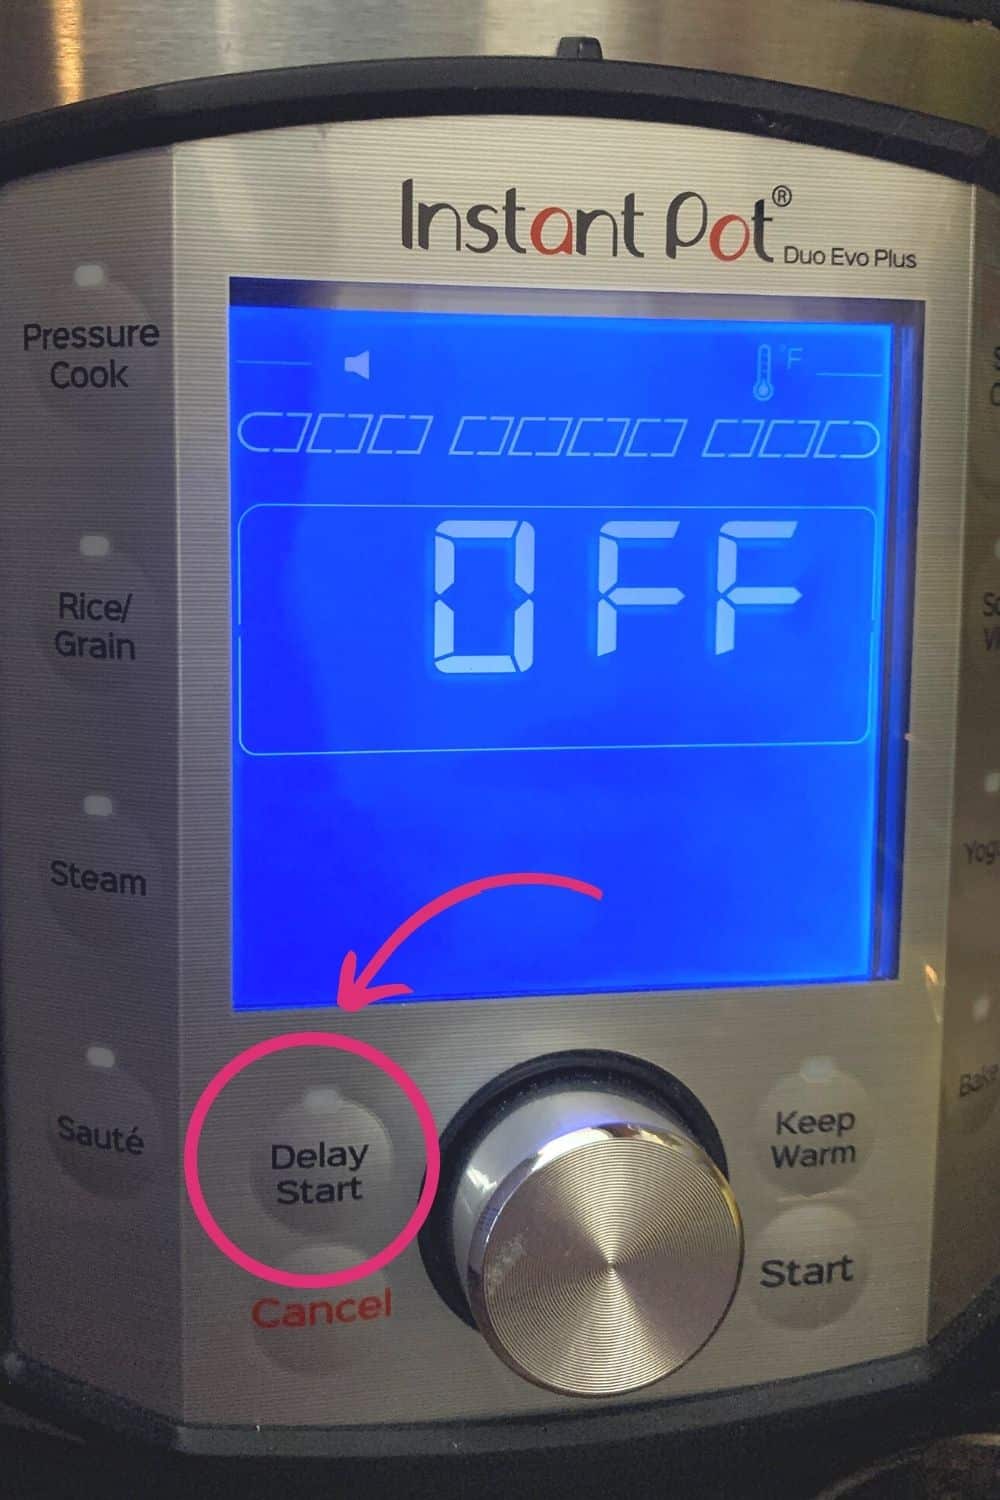 delay start button on an Instant Pot DUO EVO Plus